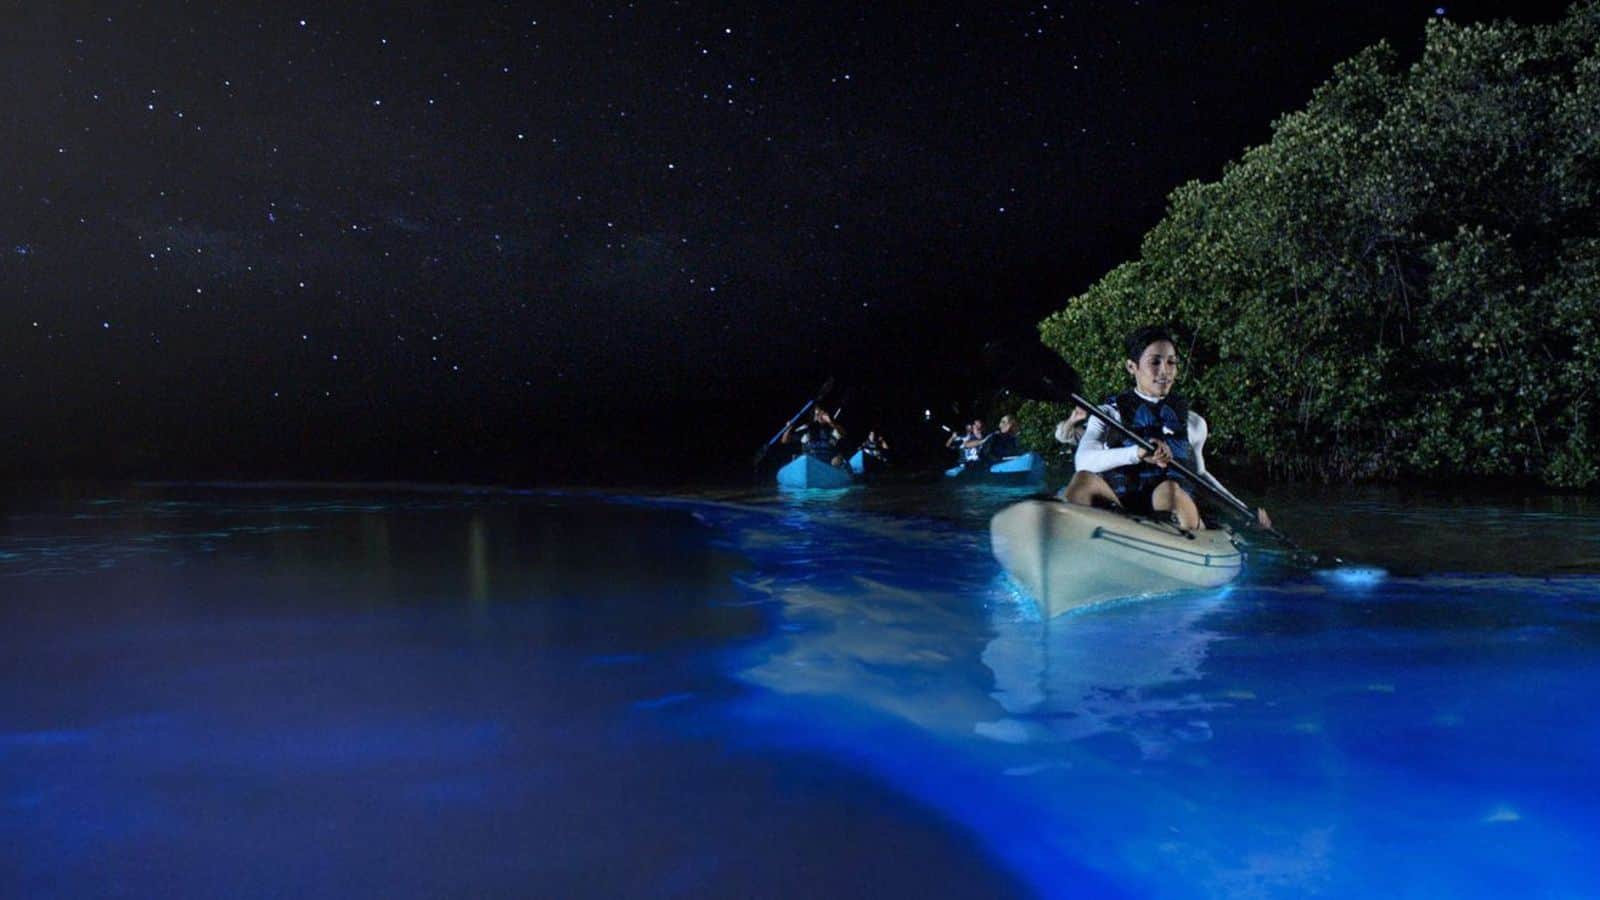 Head over to Vieques, Puerto Rico's bioluminescent bay